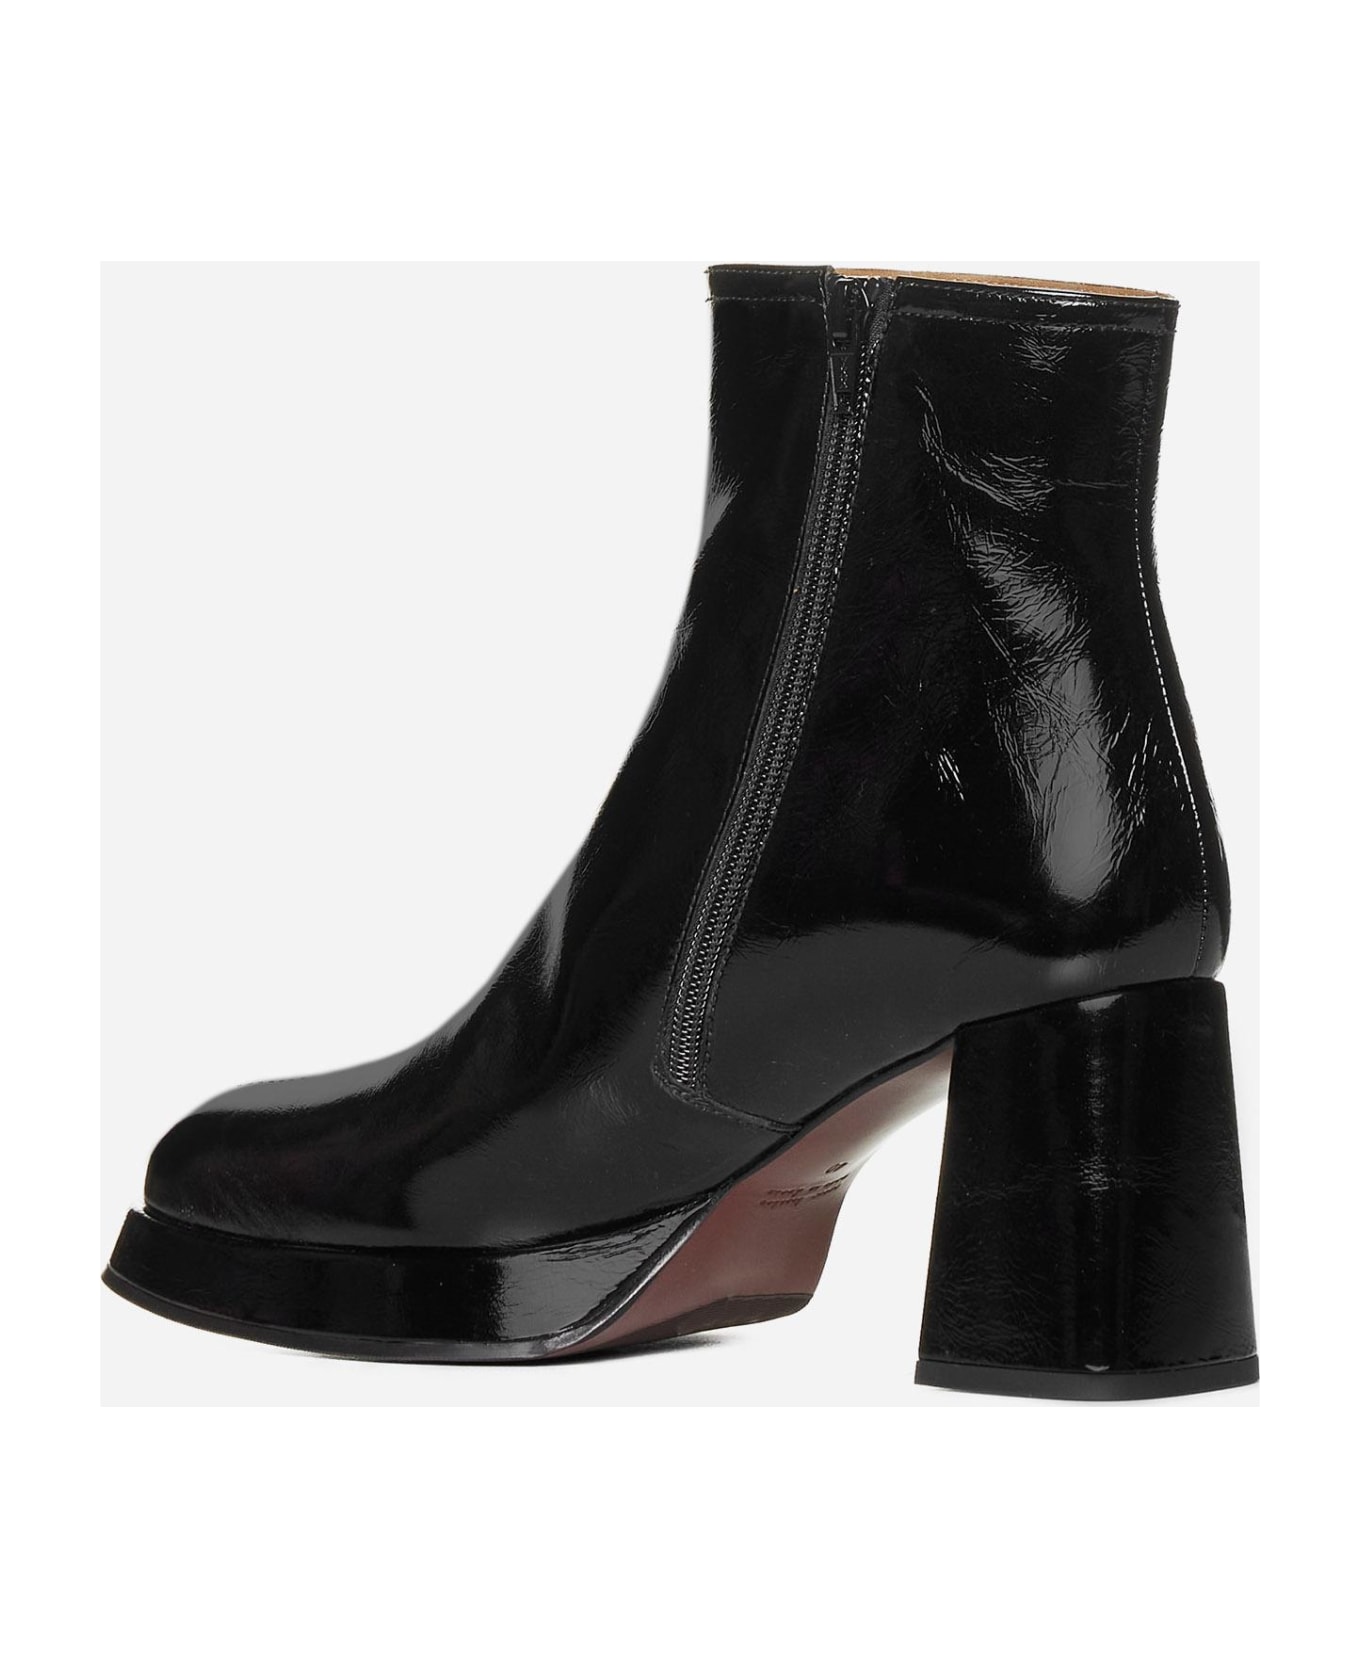 Chie Mihara Katrin Patent Leather Ankle Boots - Negro